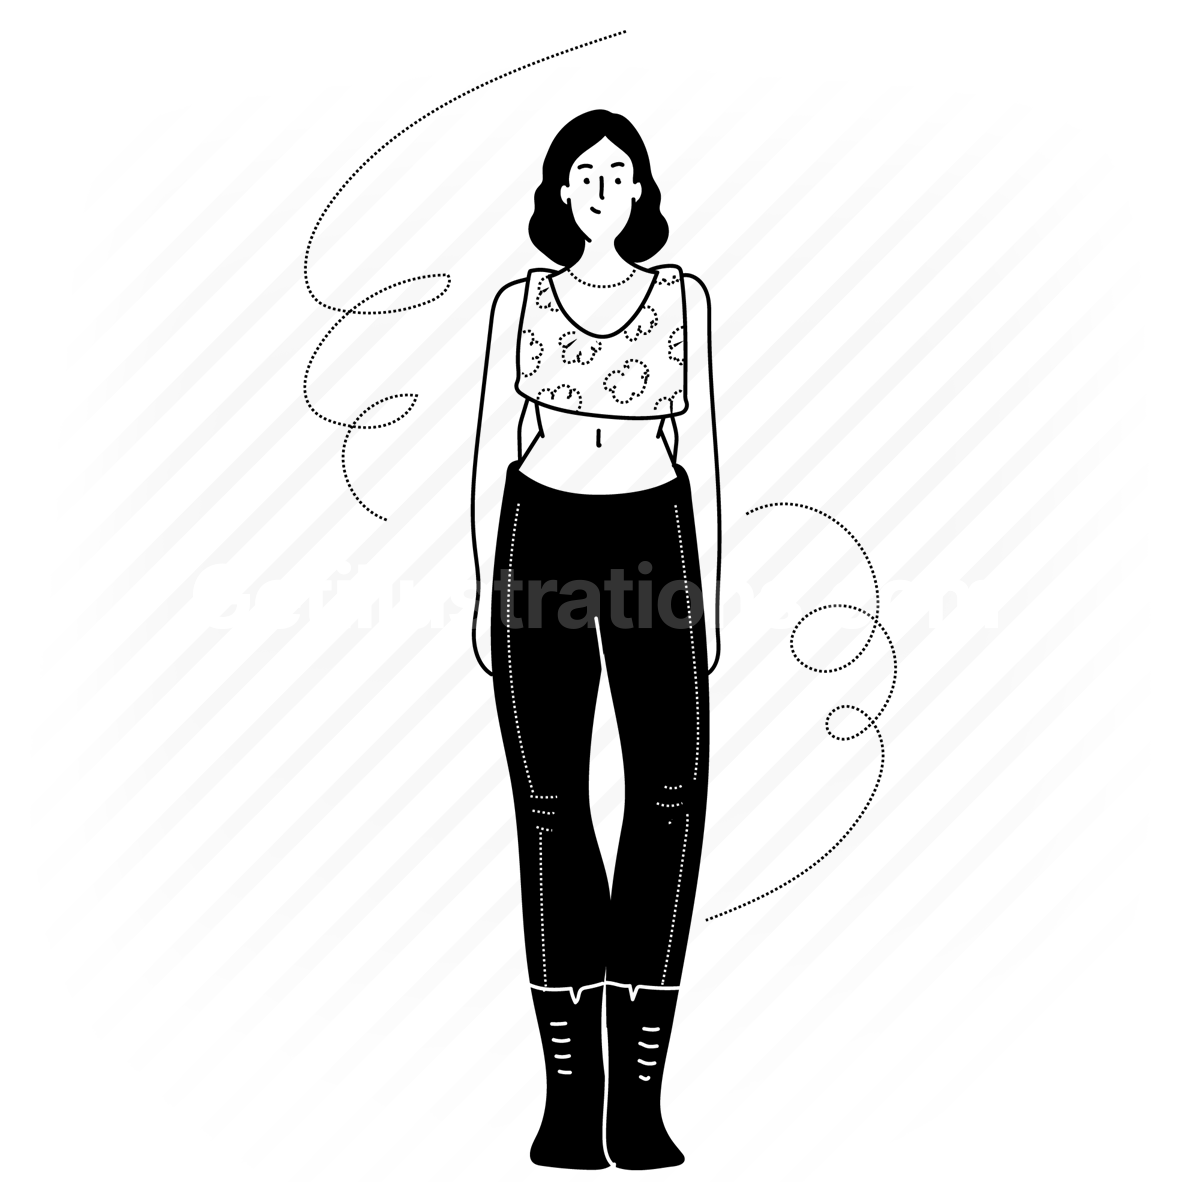 movement, pose, people, person, user, avatar, woman, stand, crop top